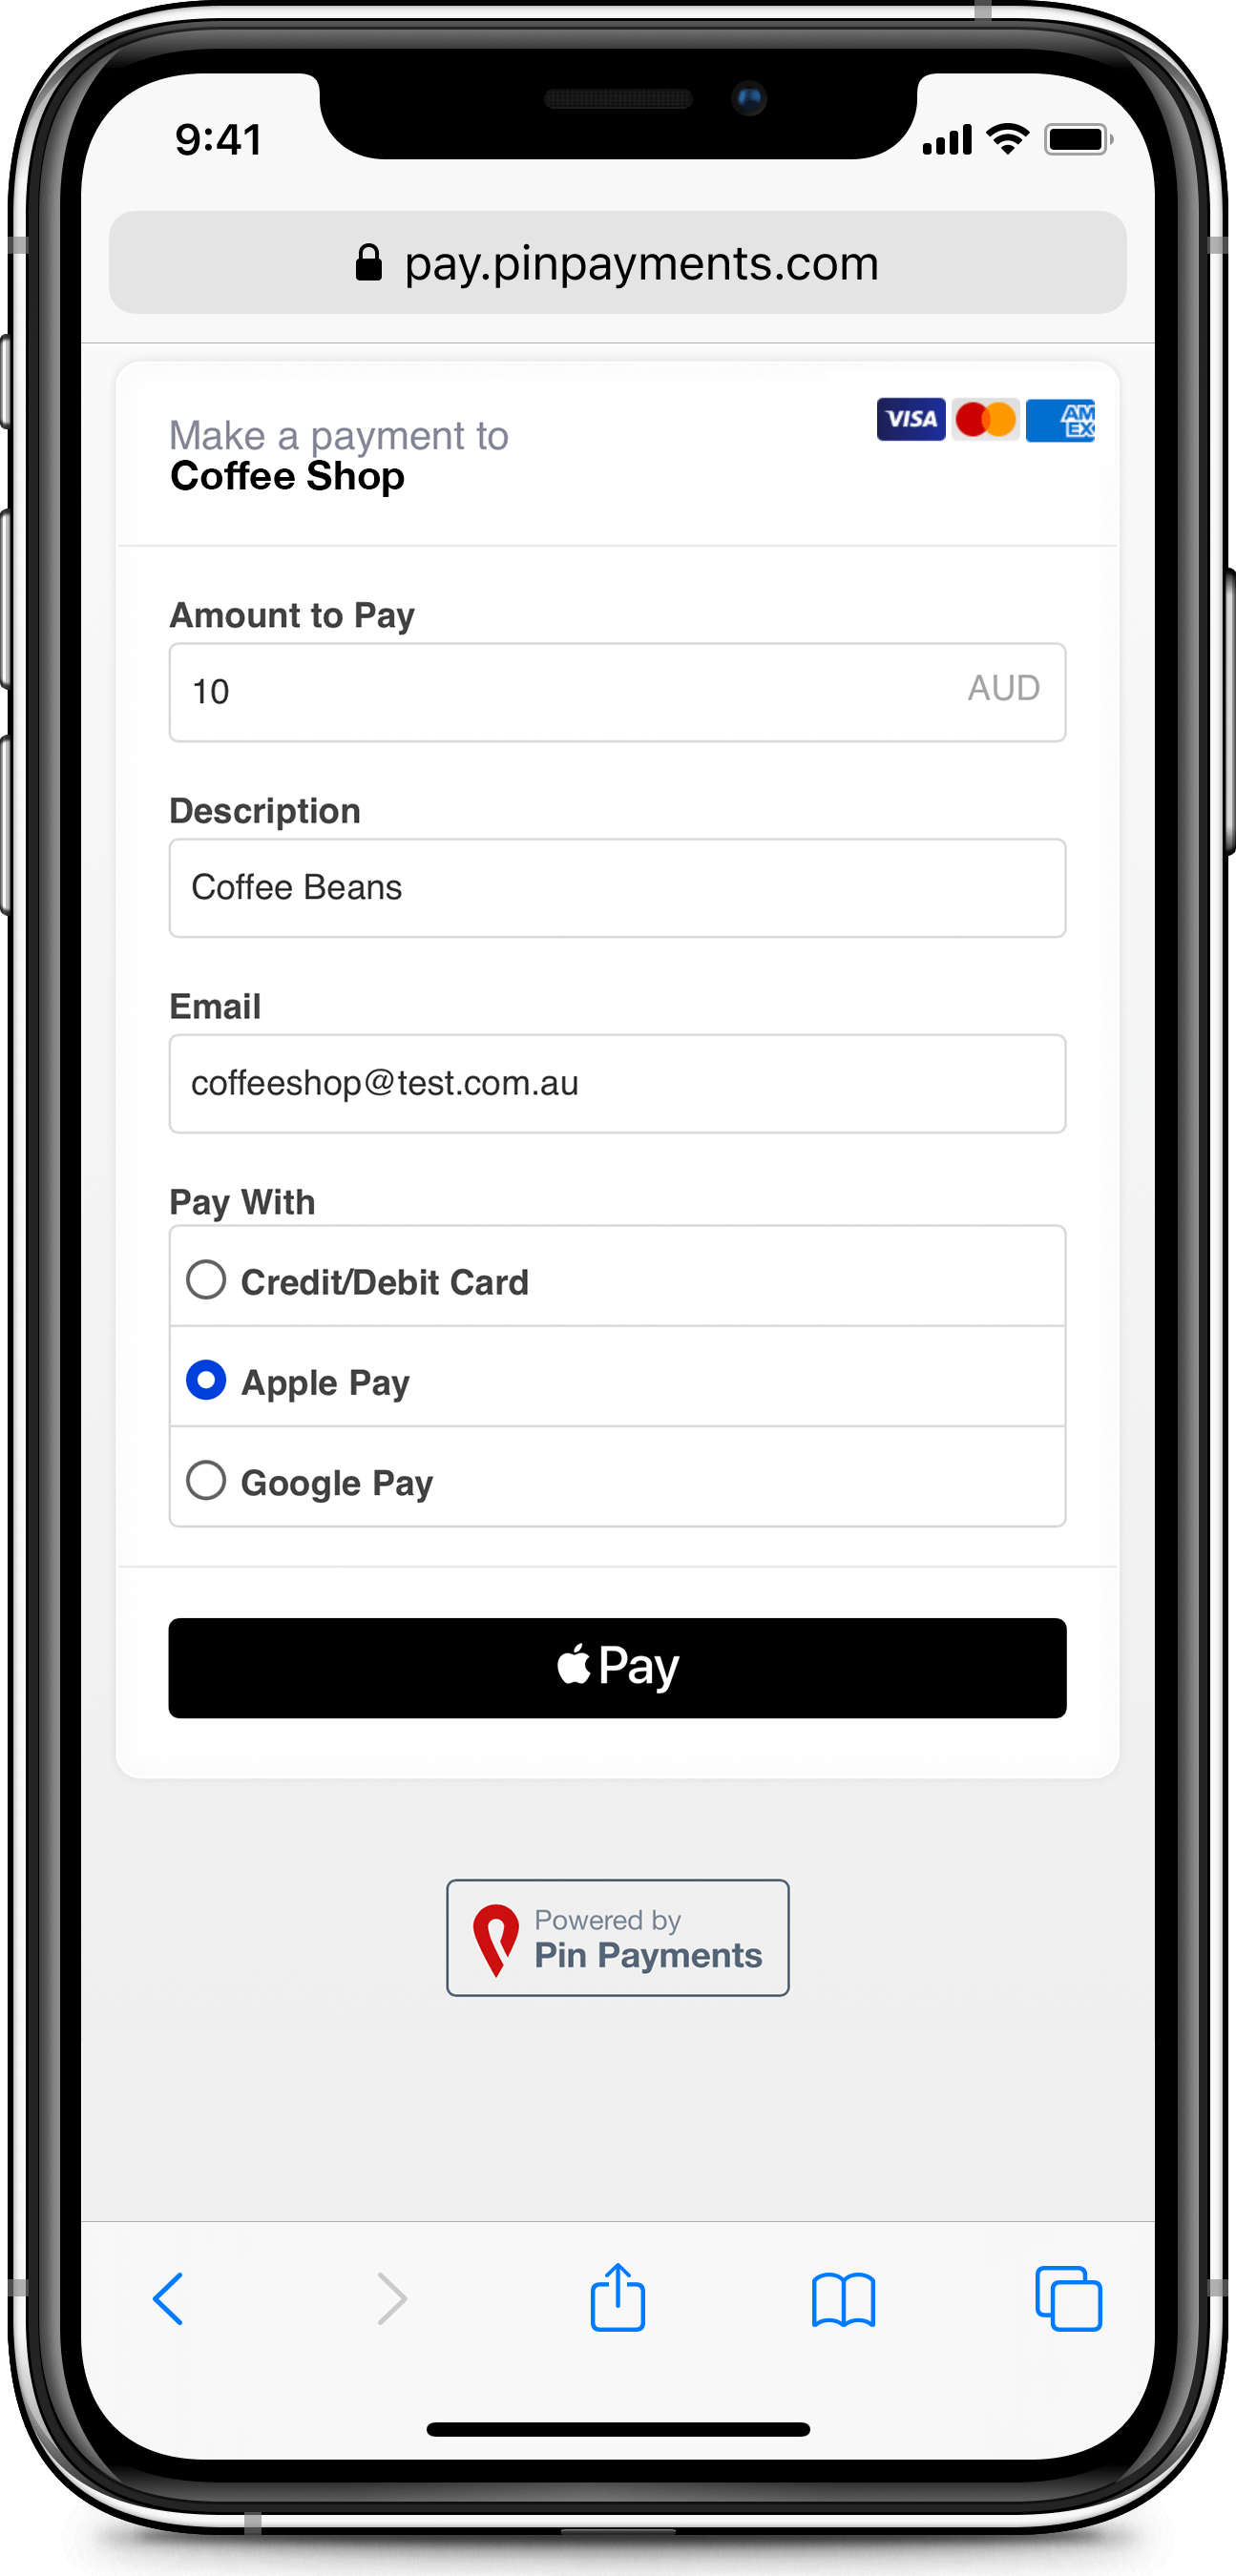 A user selects Apple Pay as their payment method using Pin Payments' Payment Page.